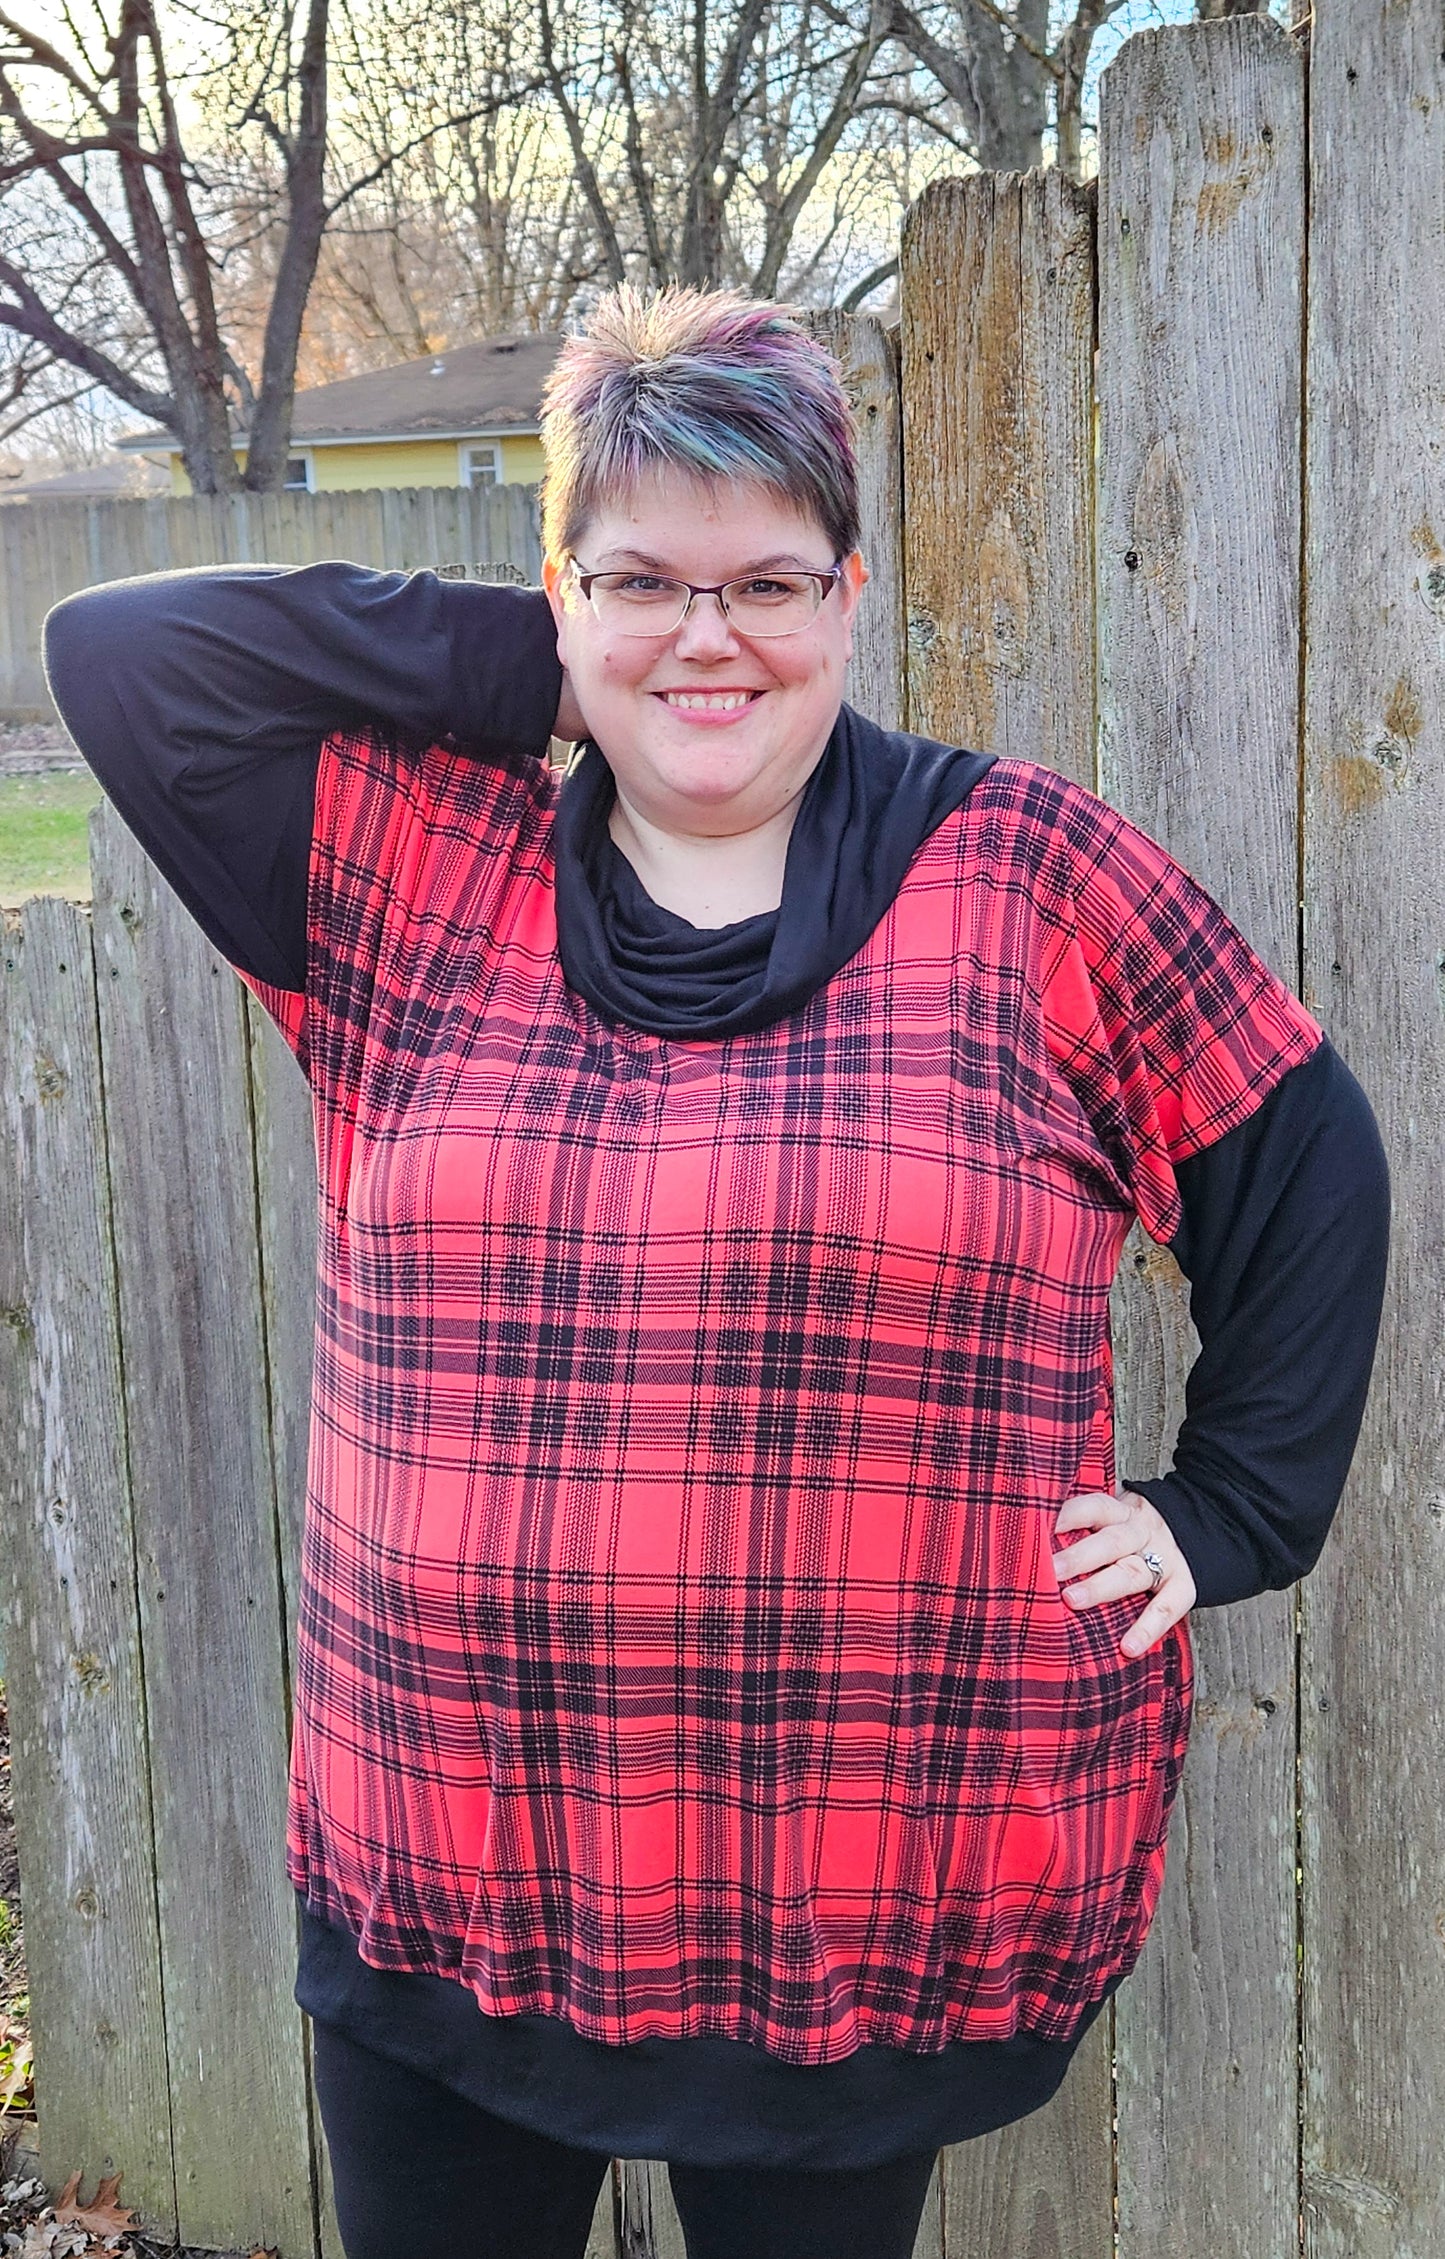 image of person wearing red and black plaid tunic